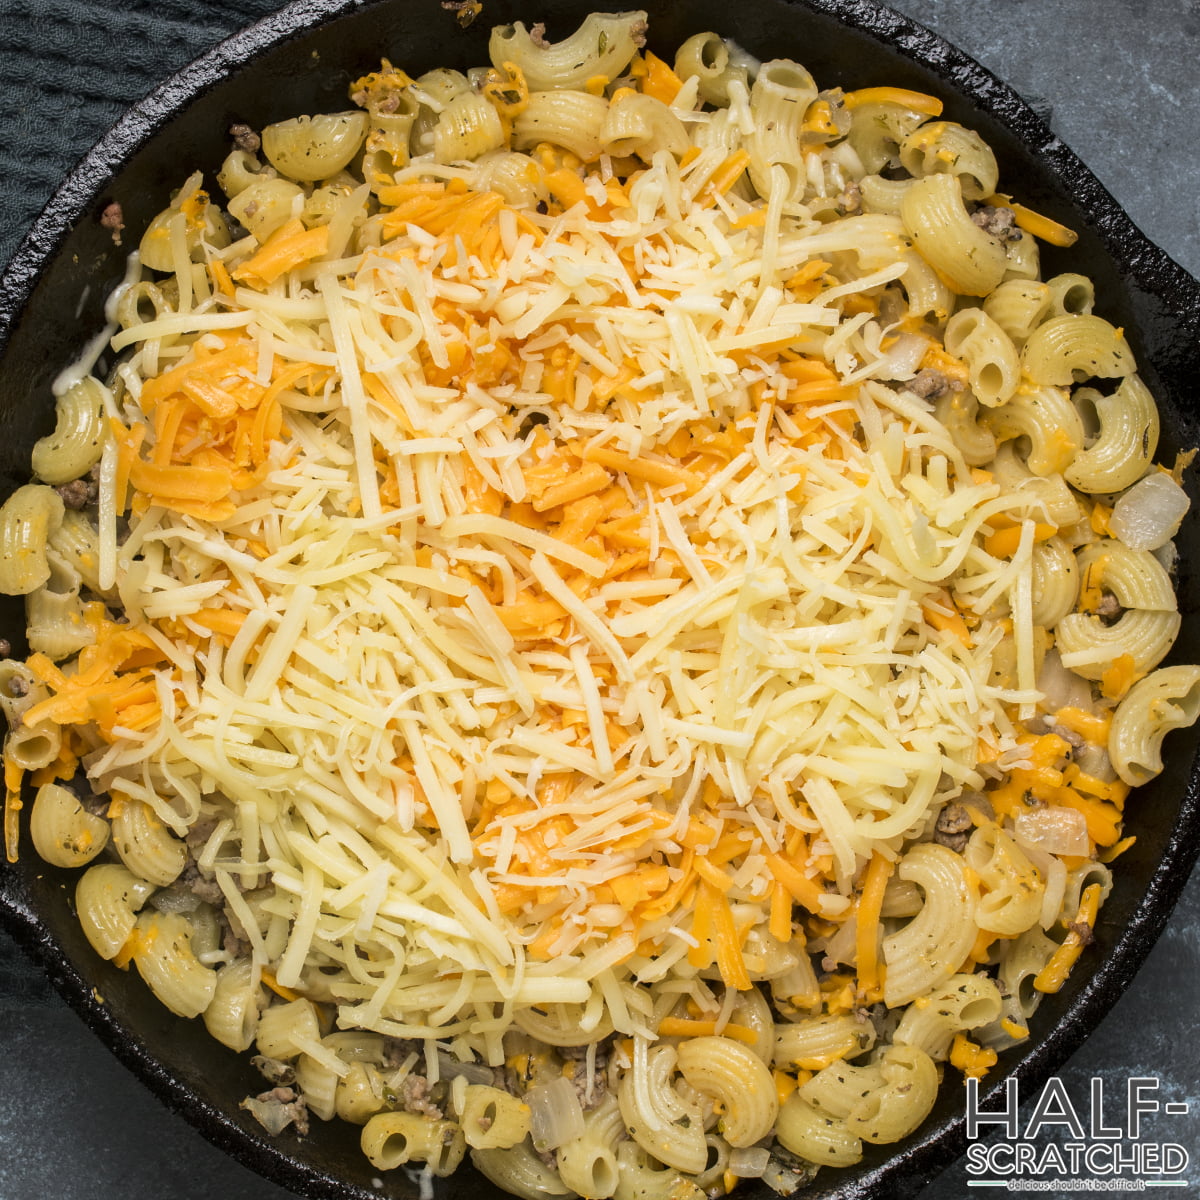 Adding mozzarella and cheddar to macaroni and meat